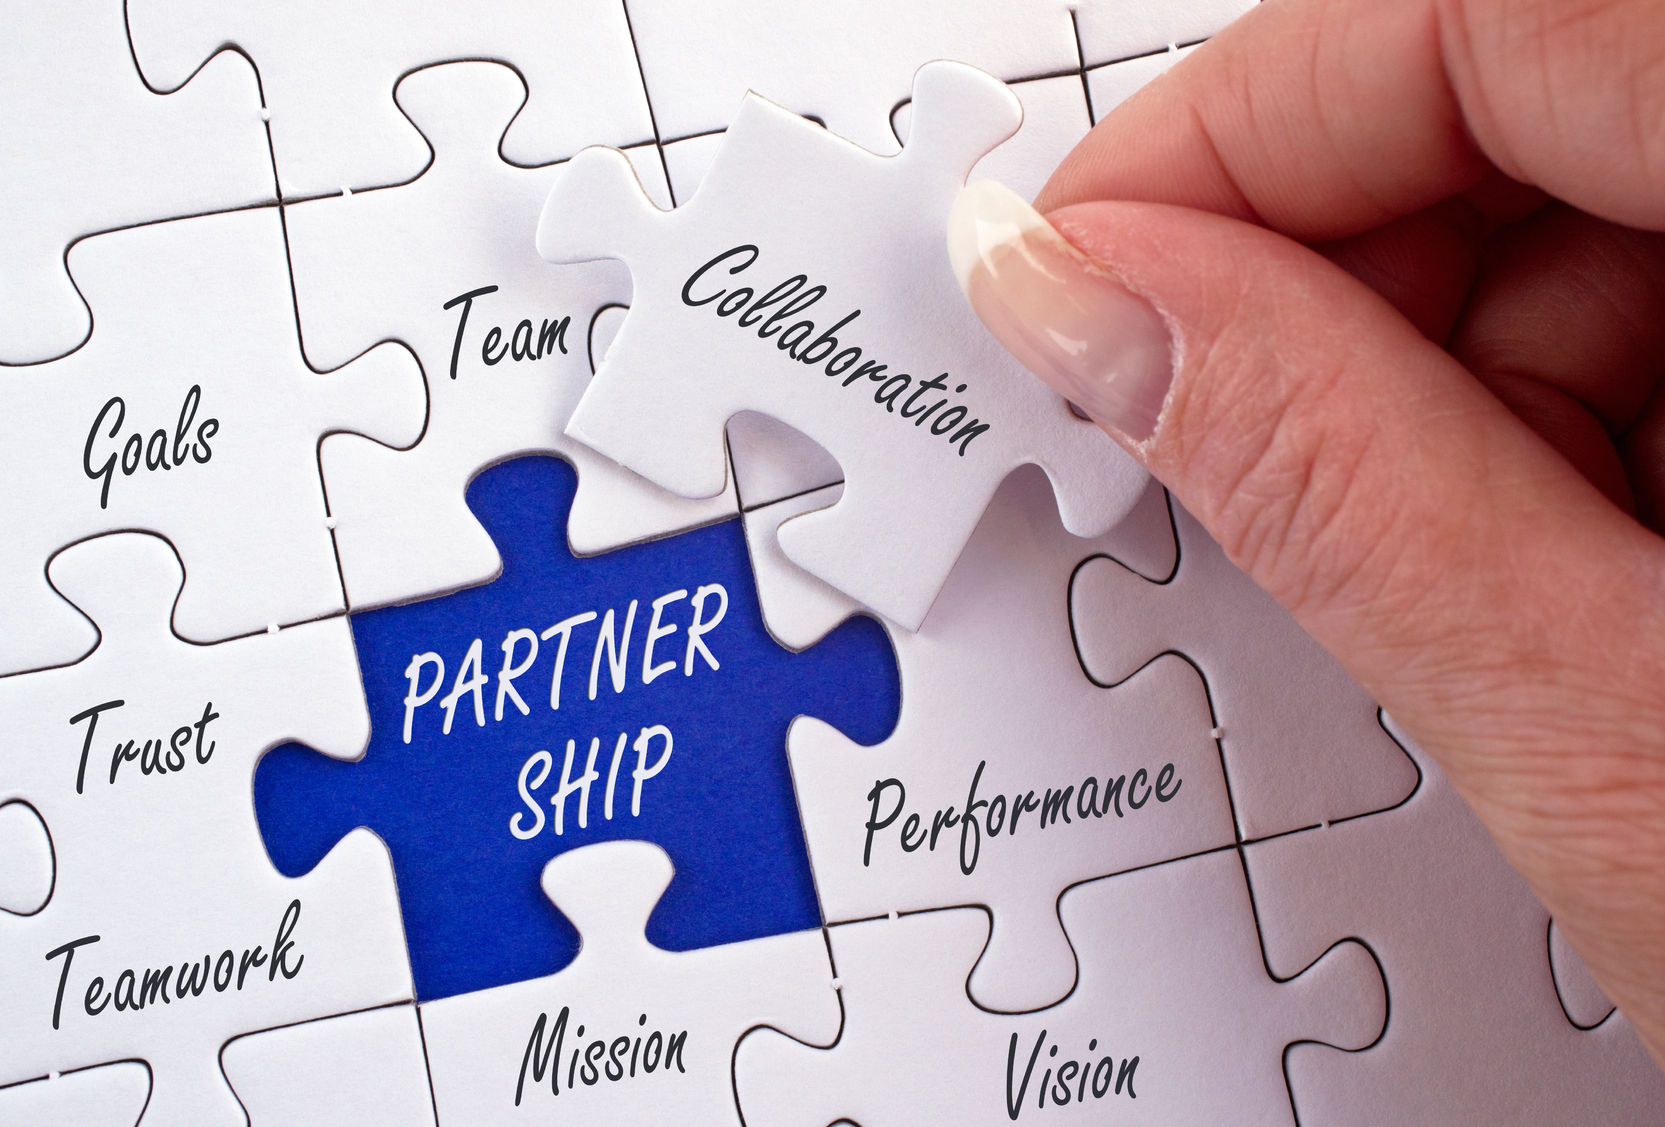 Image of a hand placing a missing jigsaw piece into the space for the word ‘partnership’ to complete the jigsaw.